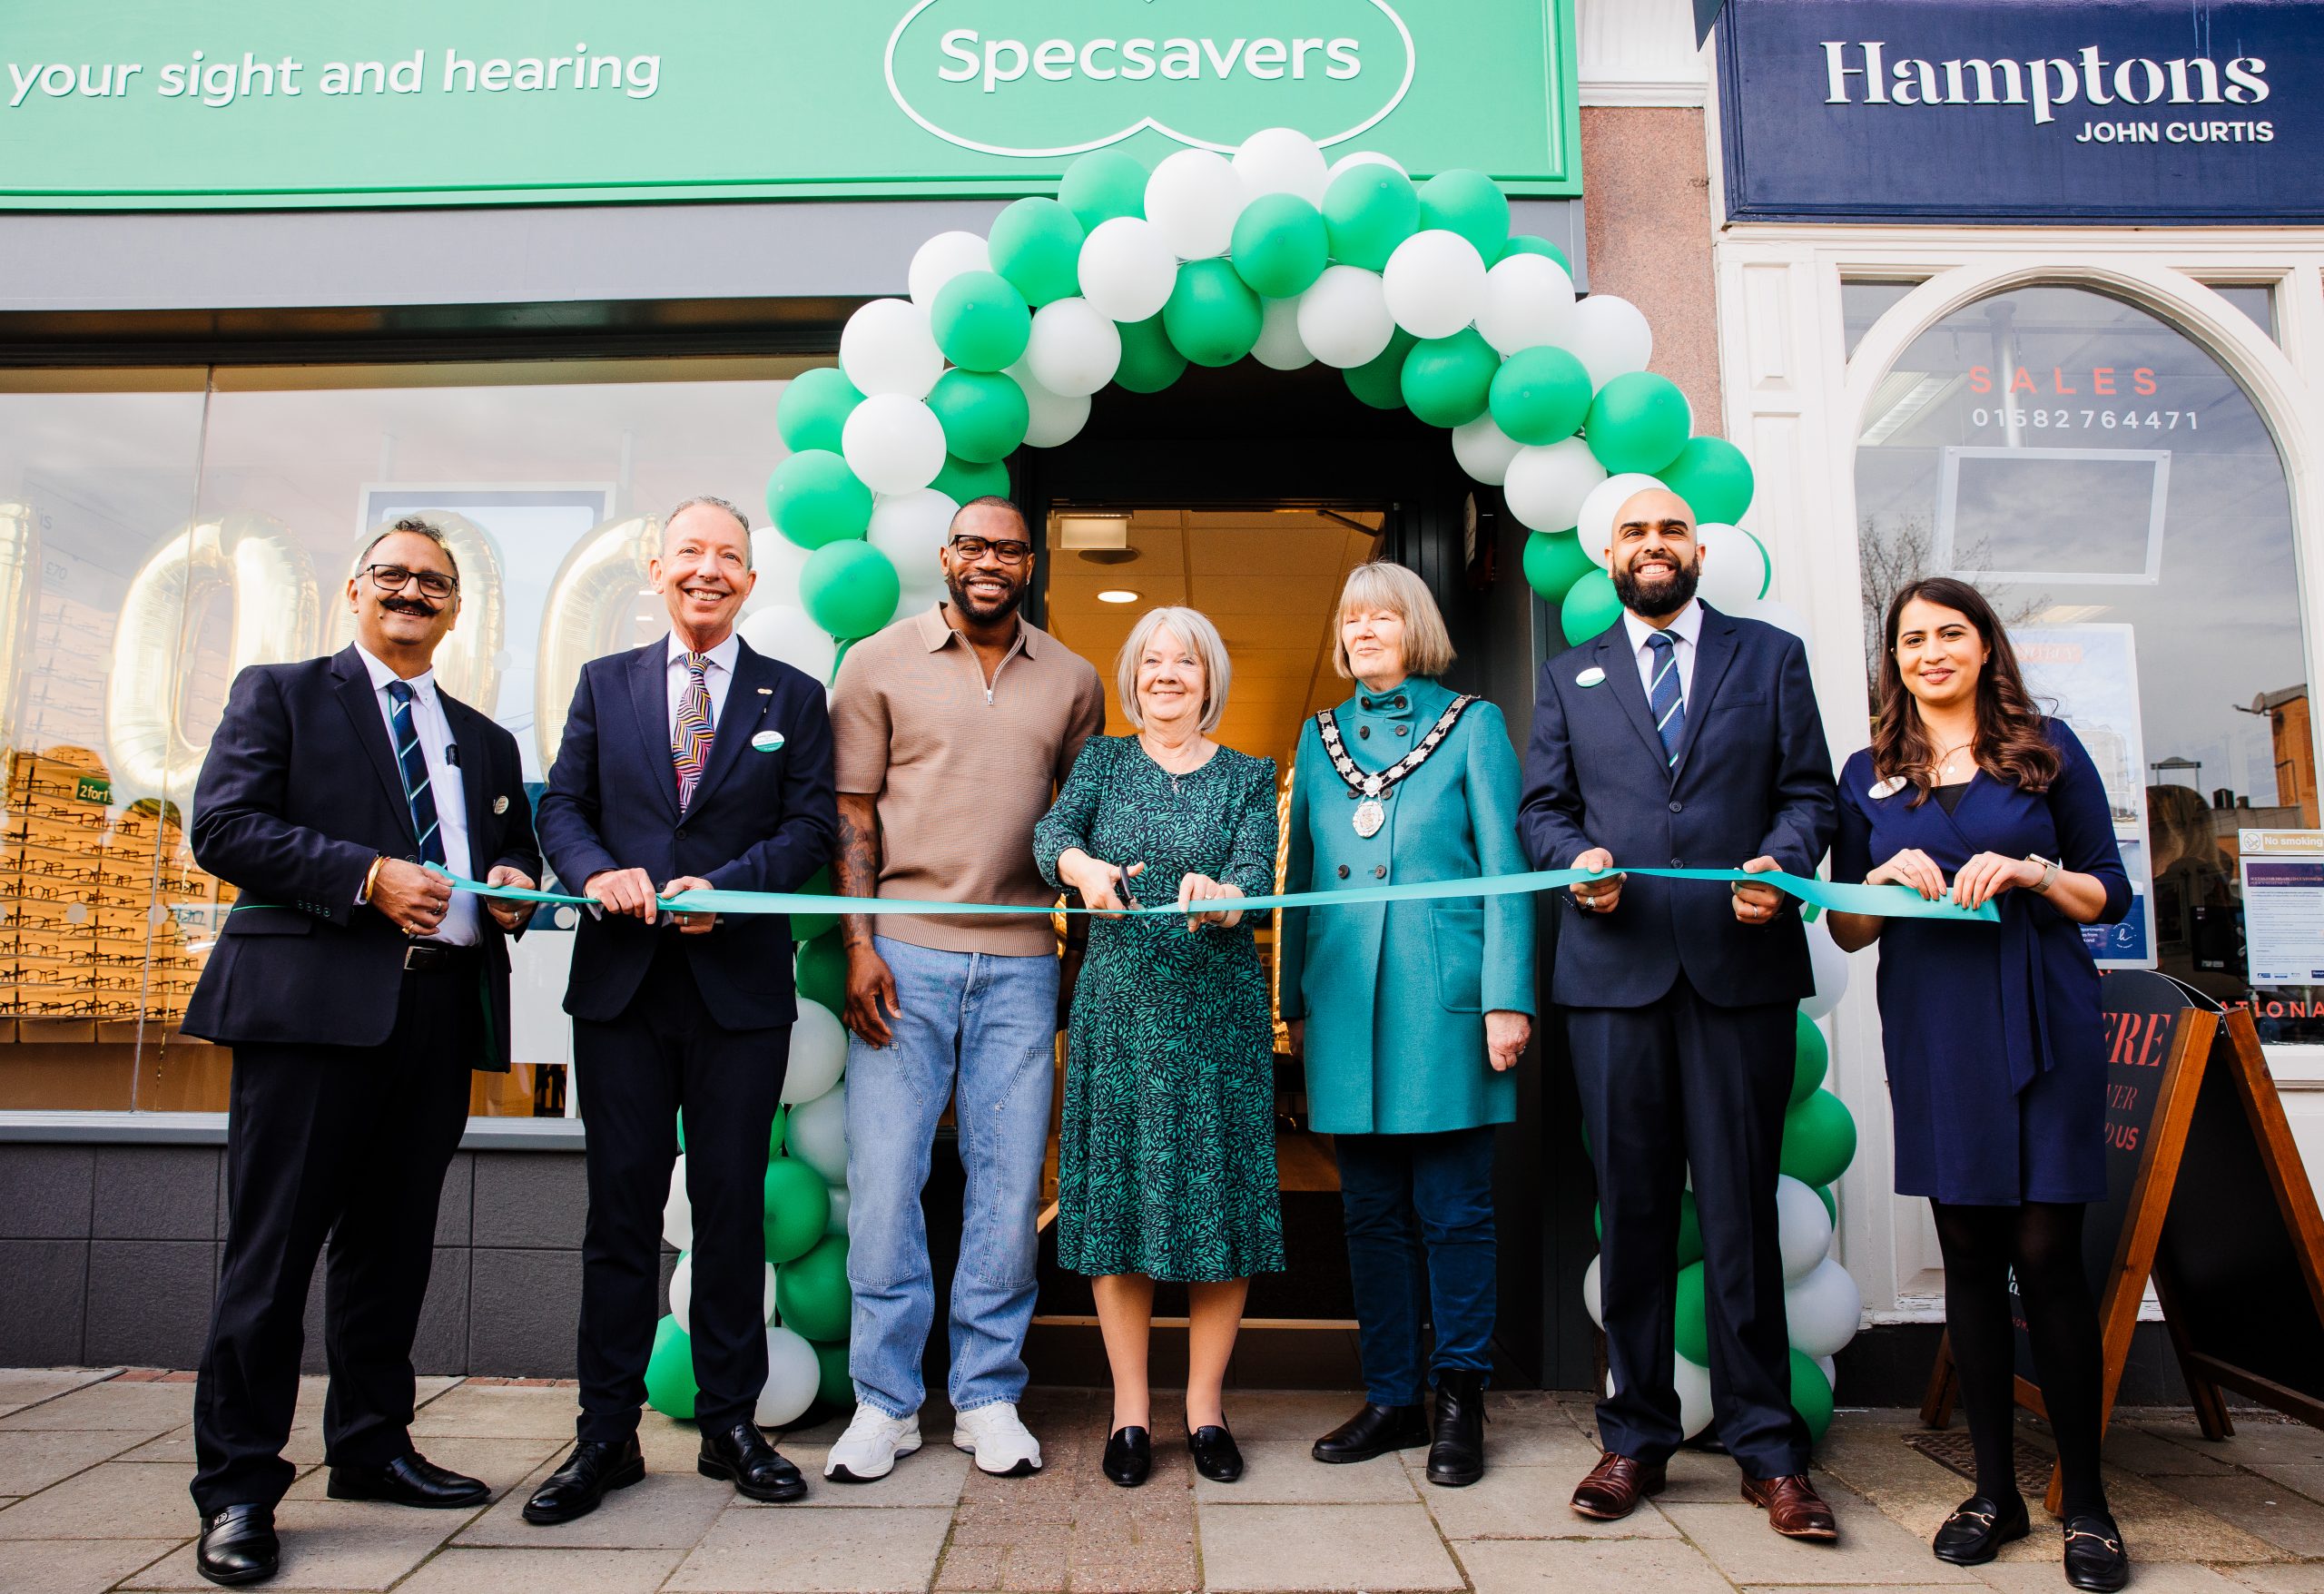 Specsavers 1,000th store opening Ugo Monye Dame Mary Perkins